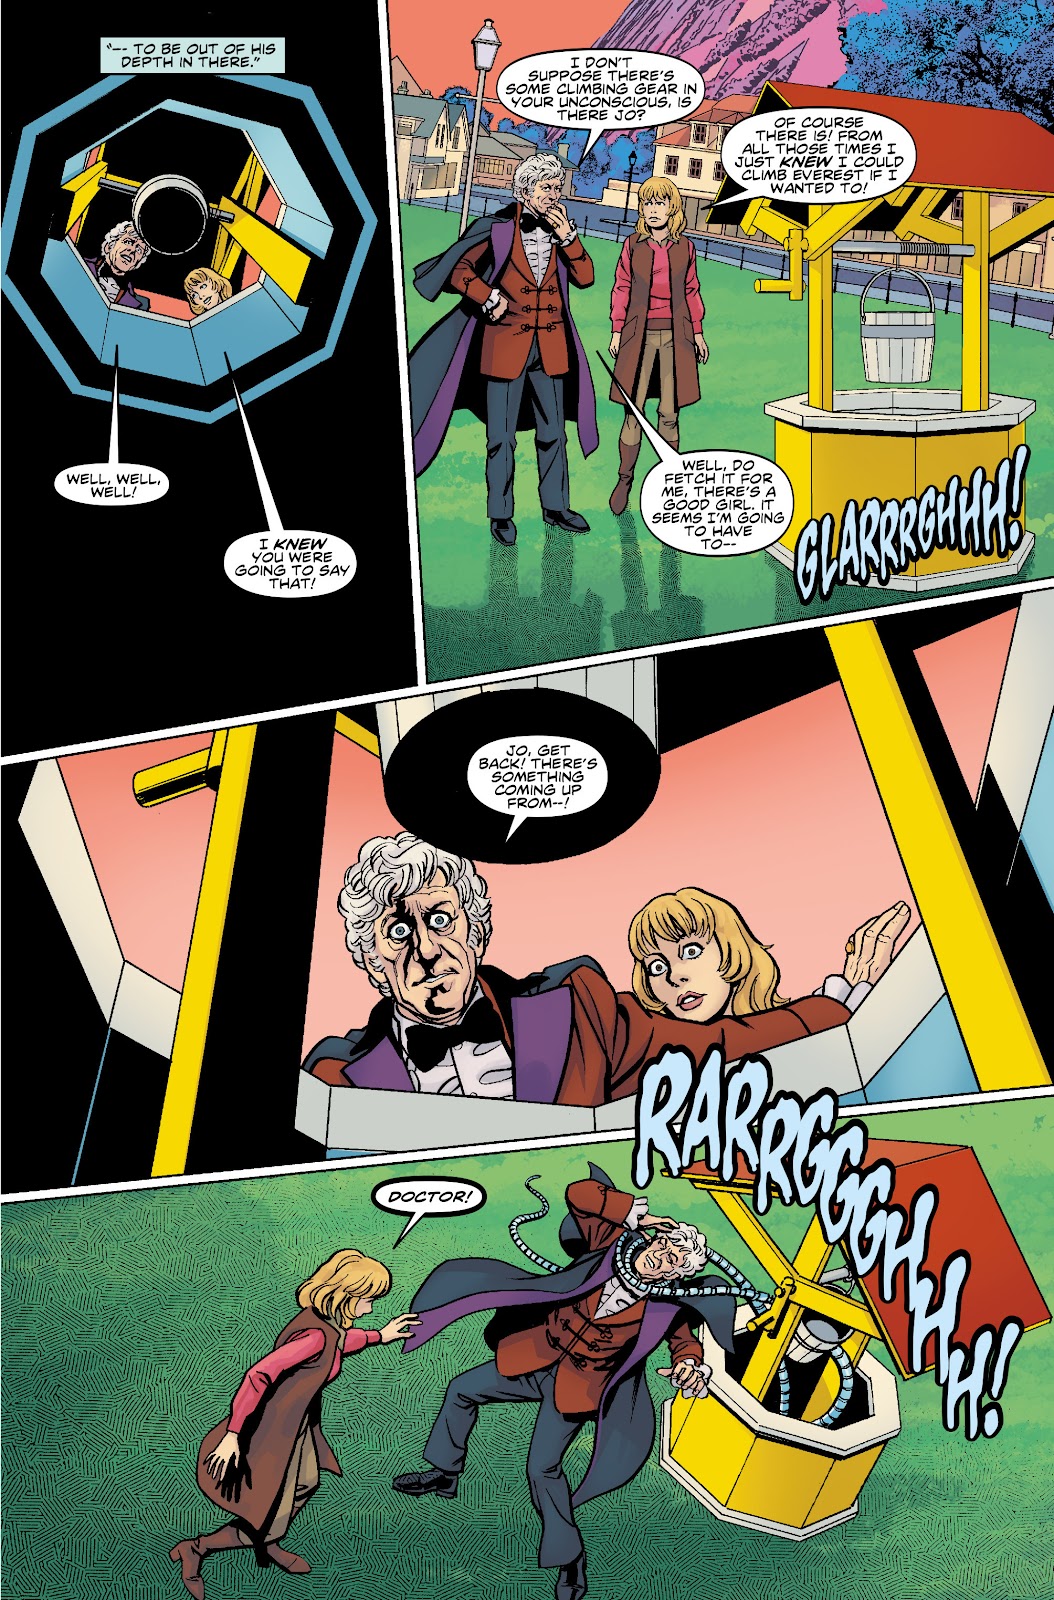 Doctor Who: The Third Doctor issue 2 - Page 23